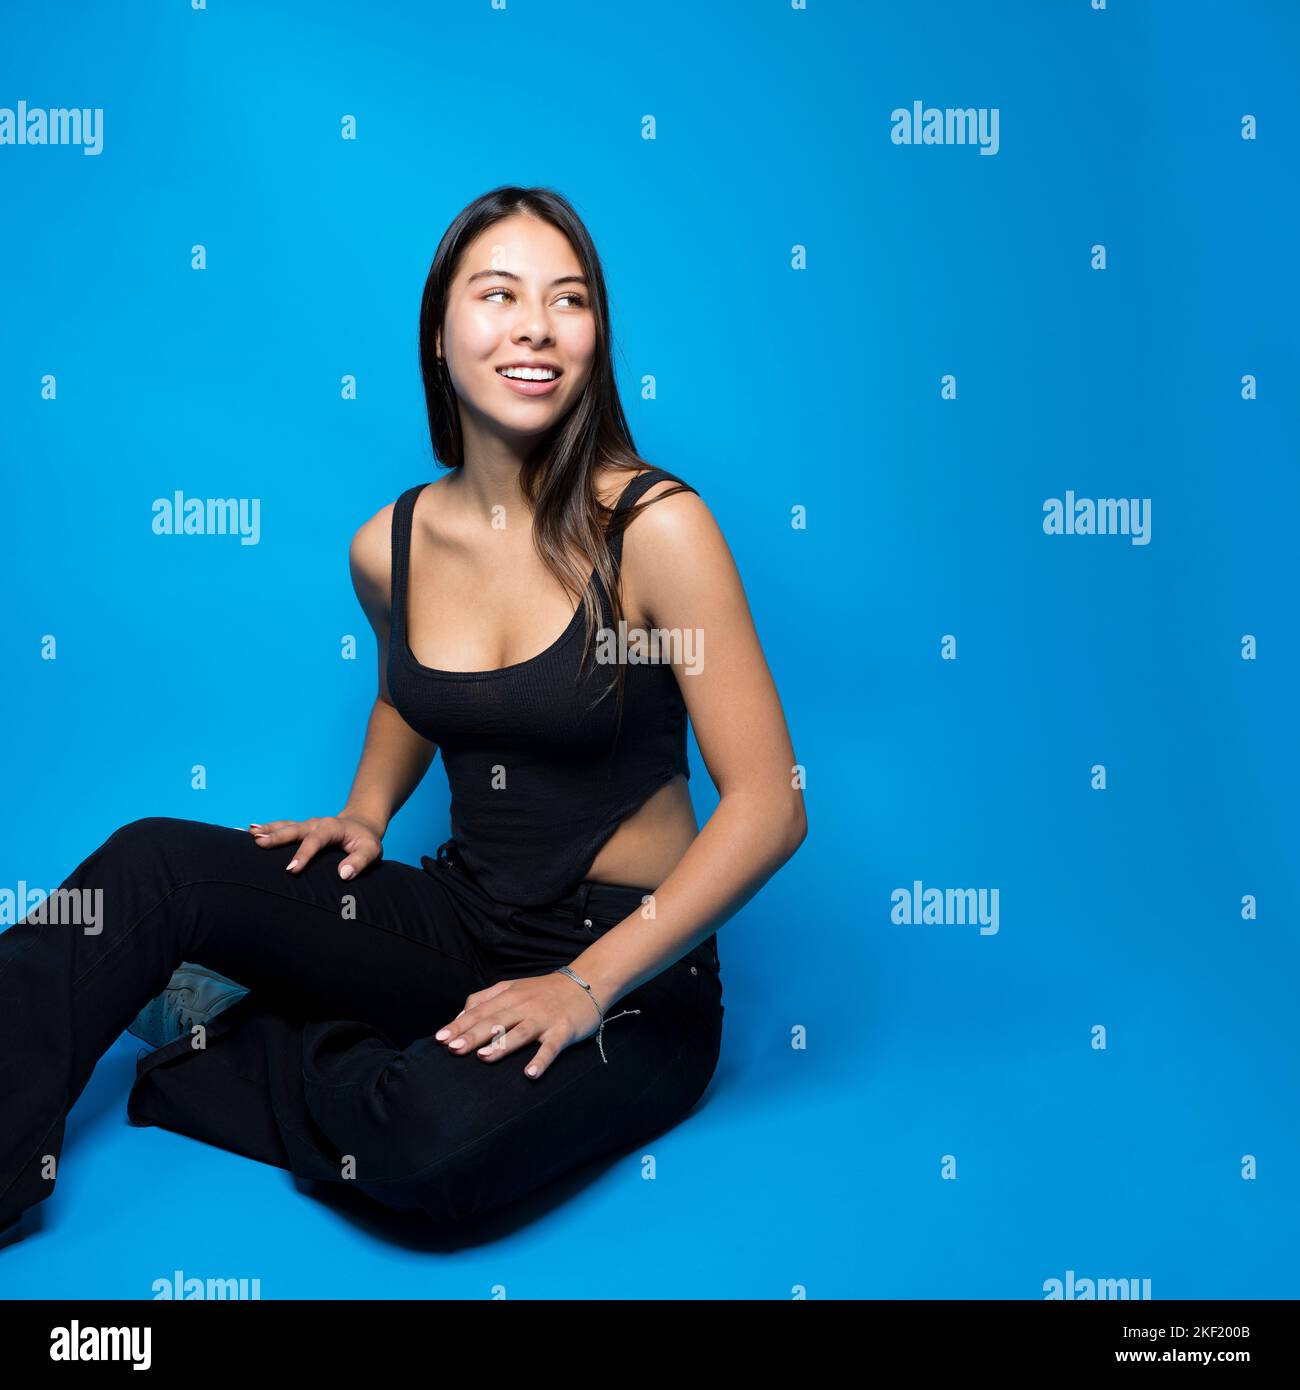 Beautiful Multiracial Teen Female Sitting Cross Legged on the Floor Looking Right Copy Space on Isolated Blue Background Stock Photo